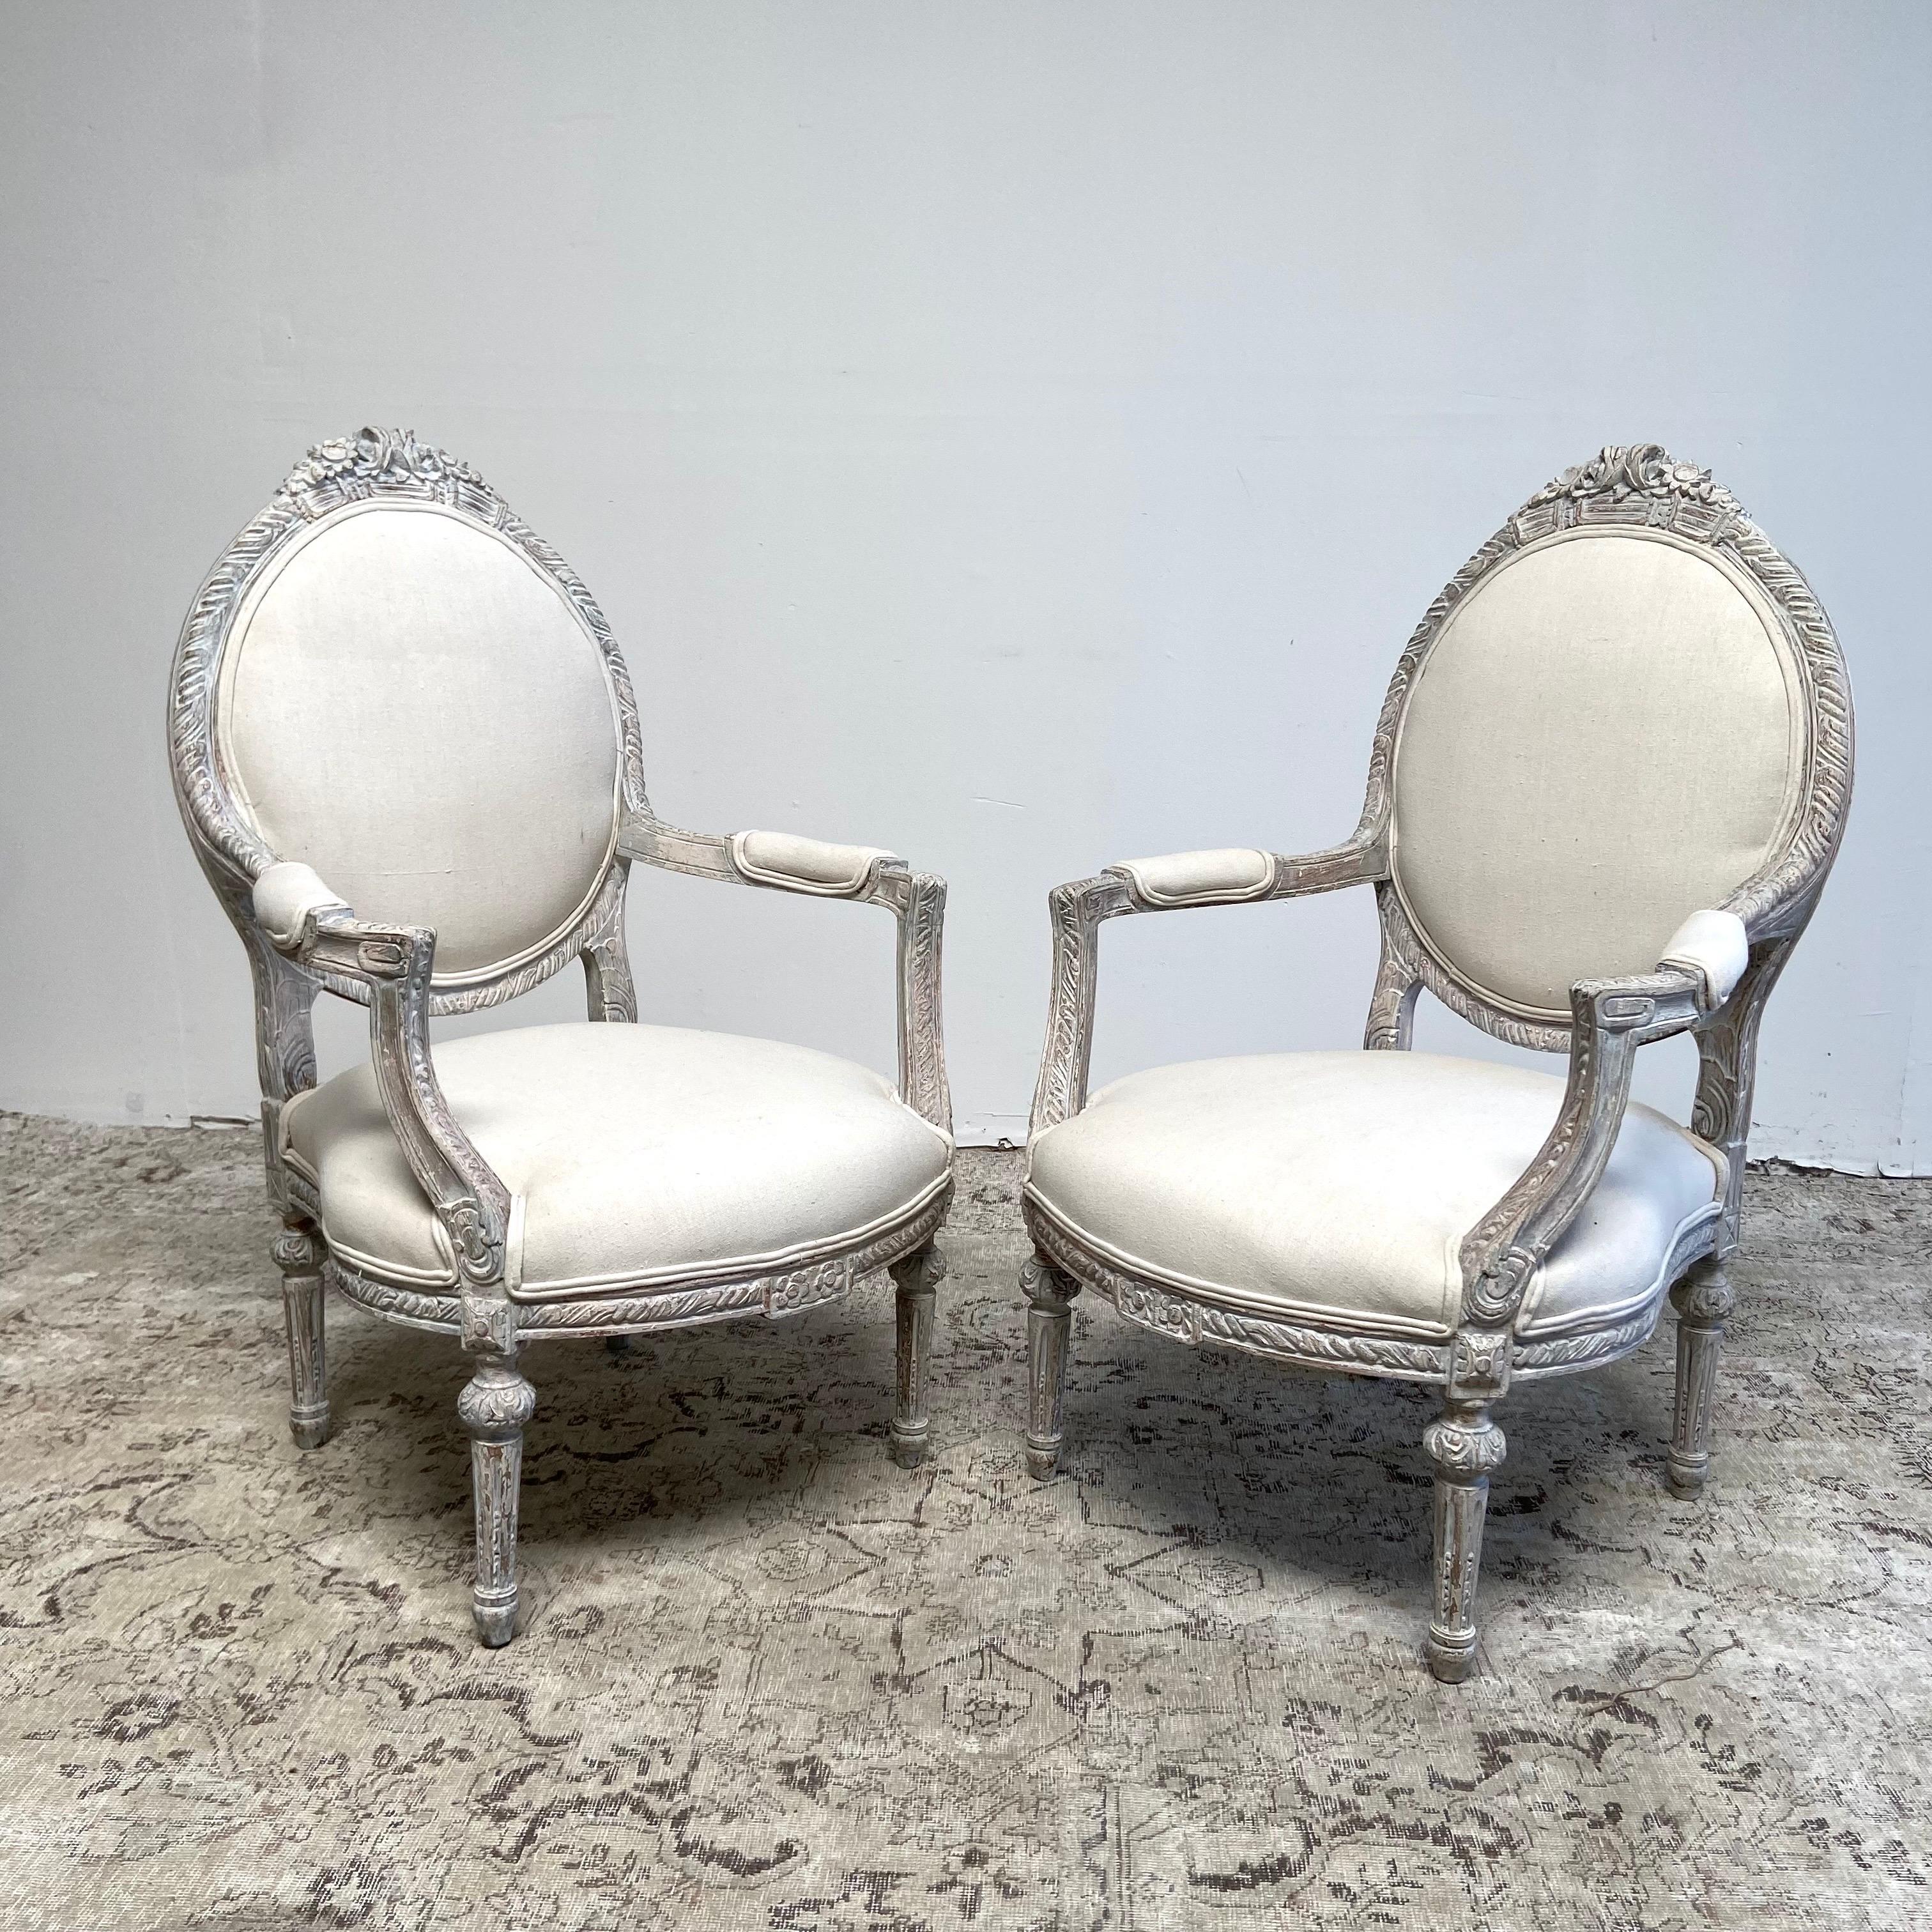 Vintage Louis XVI style painted and upholstered arm chairs
There are multiple quantities available, please enter quantity needed.
Painted in a oyster french gray washed finished, with subtle distressed edges, and upholstered in a standard cotton